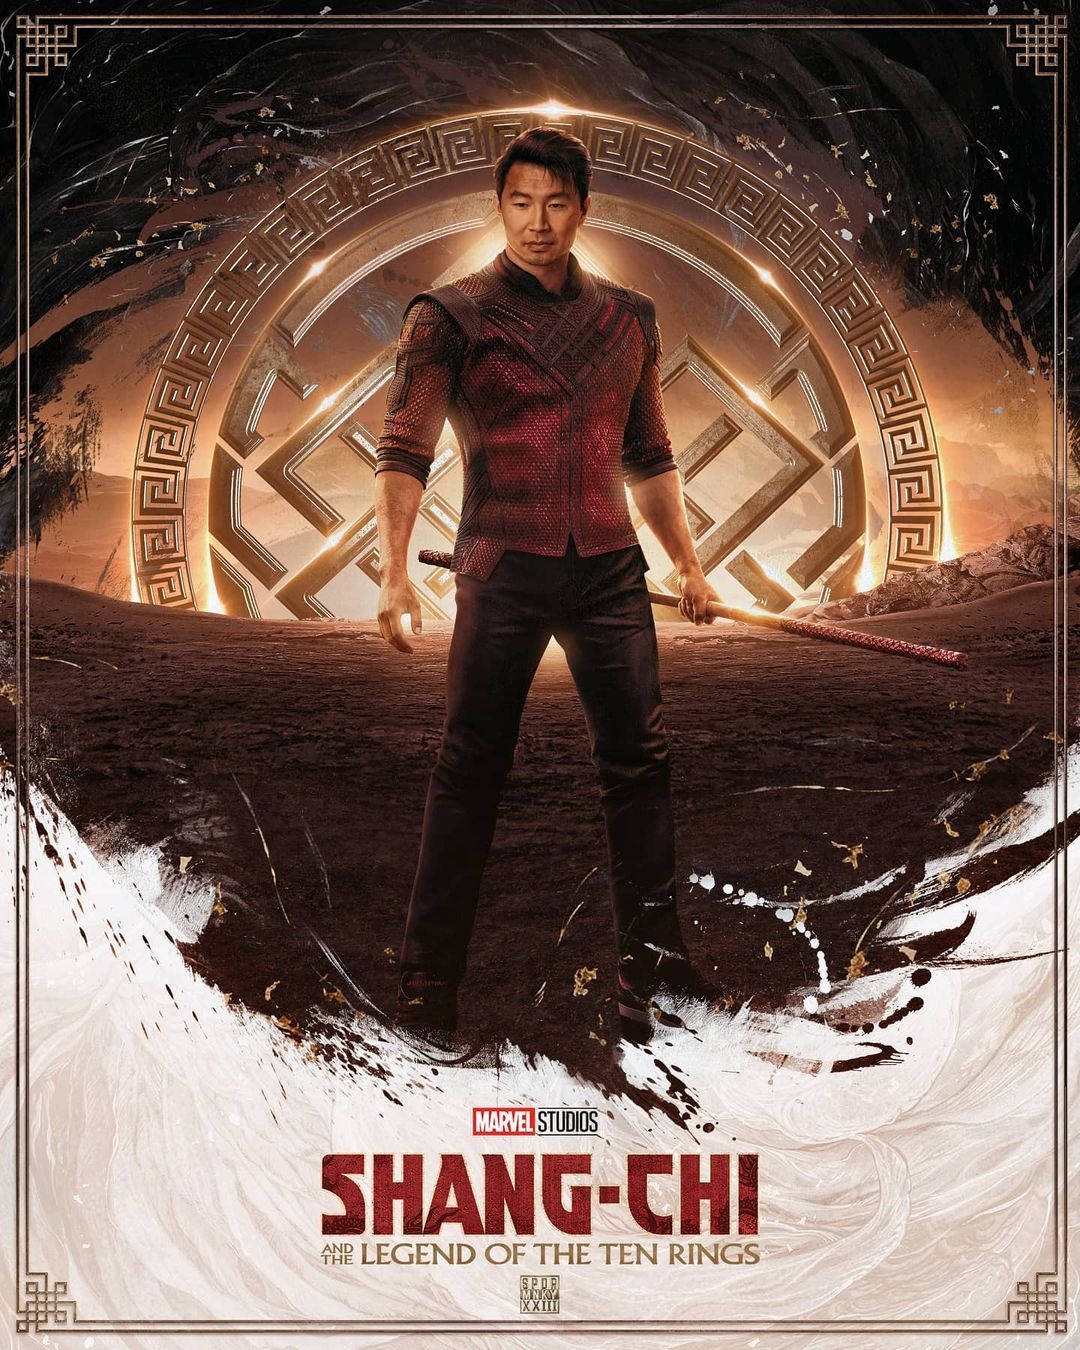 Shang-chi Solo Poster Art Background